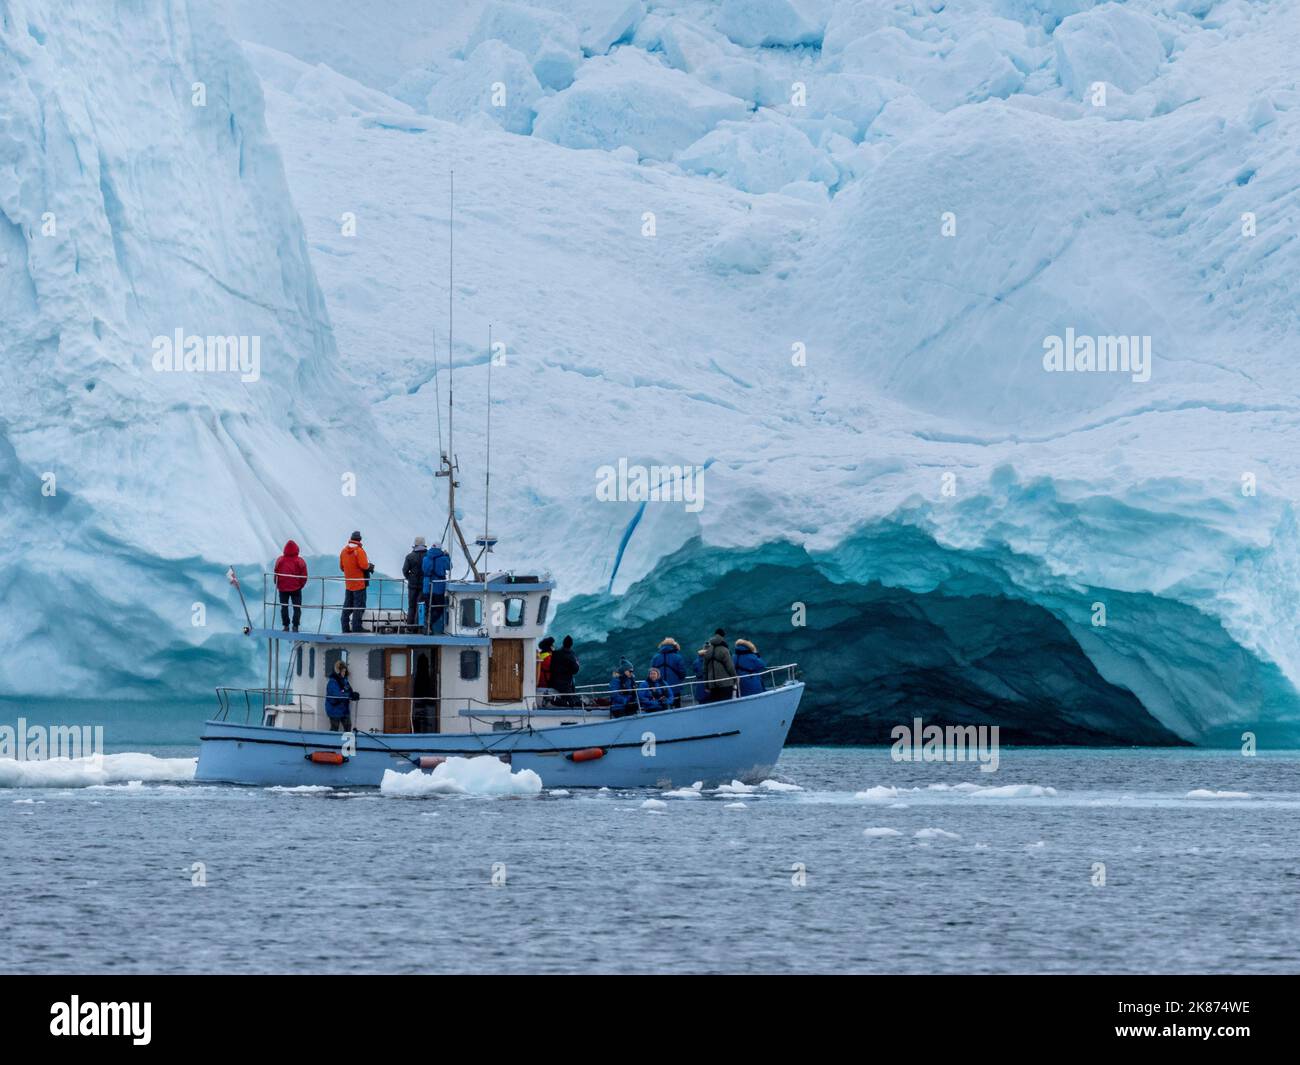 Tourists taking an ice tour in a small boat watching icebergs from the Ilulissat Icefjord, just outside Ilulissat, Greenland, Denmark, Polar Regions Stock Photo